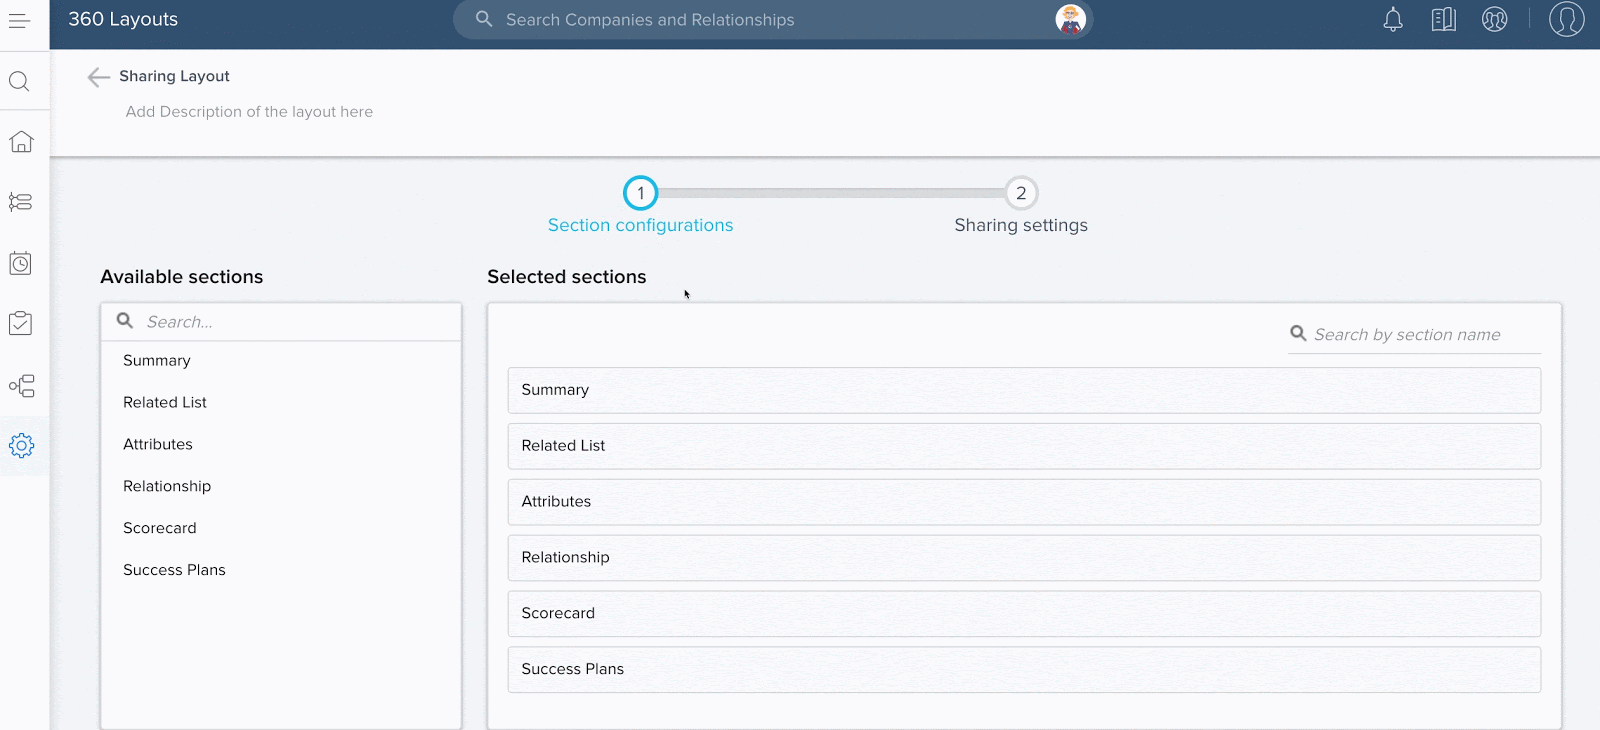 10. NXT configure shared 360 attributes section.gif